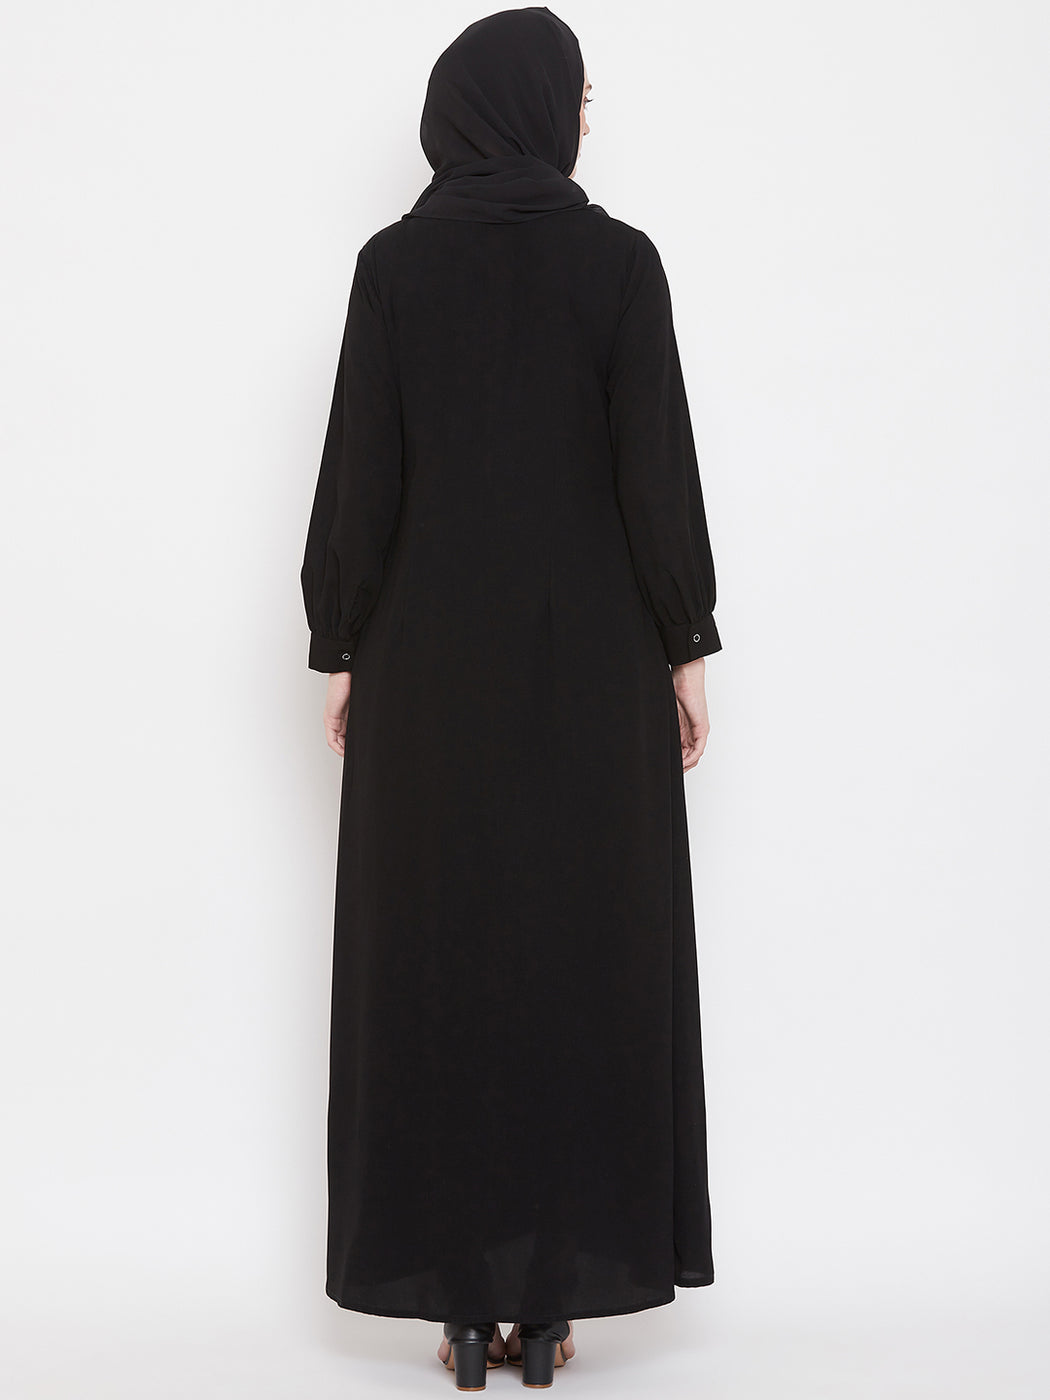 Nabia Front Open Abaya with Georgette Hijab